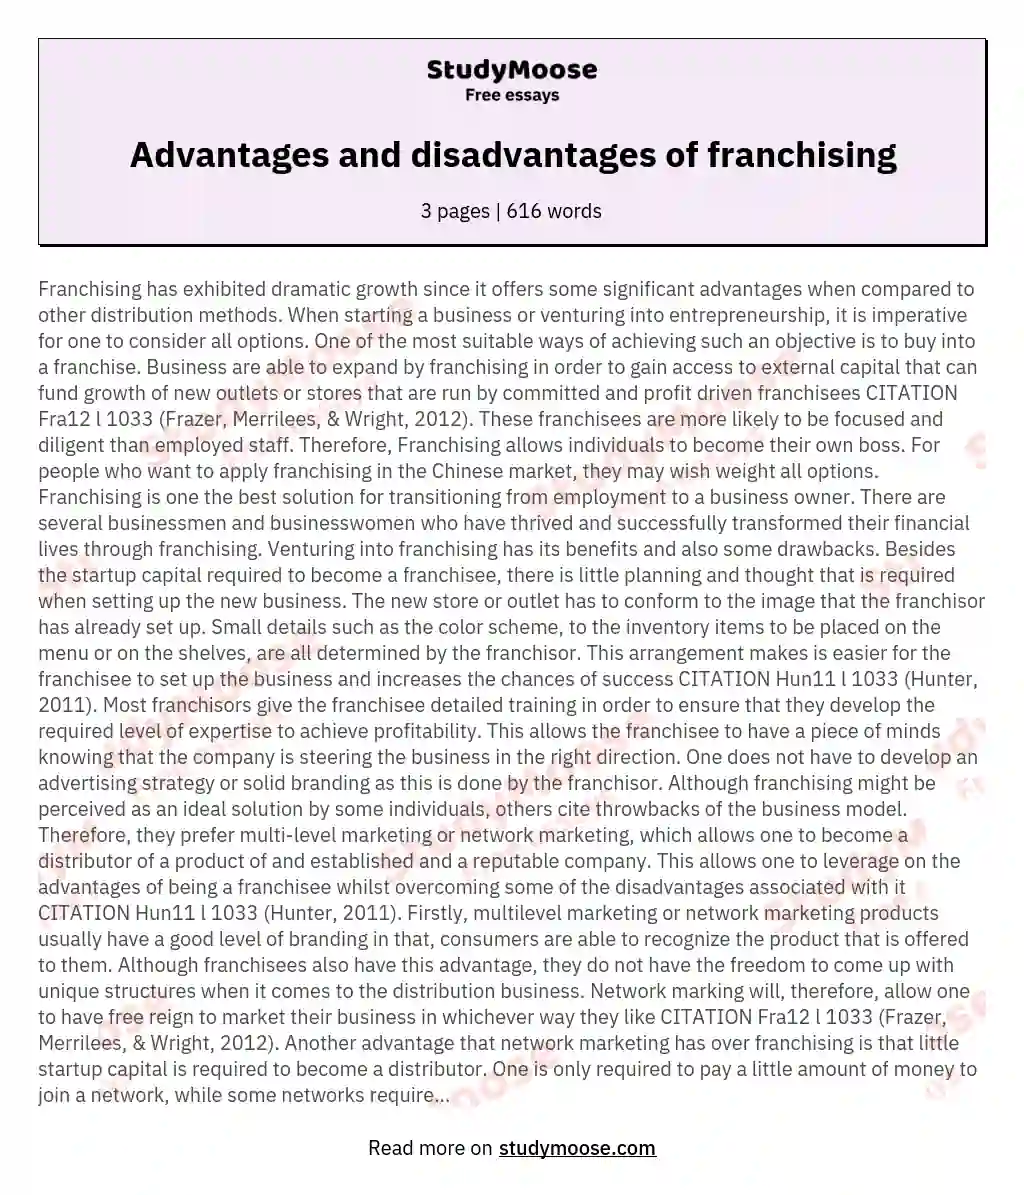 Advantages and disadvantages of franchising essay